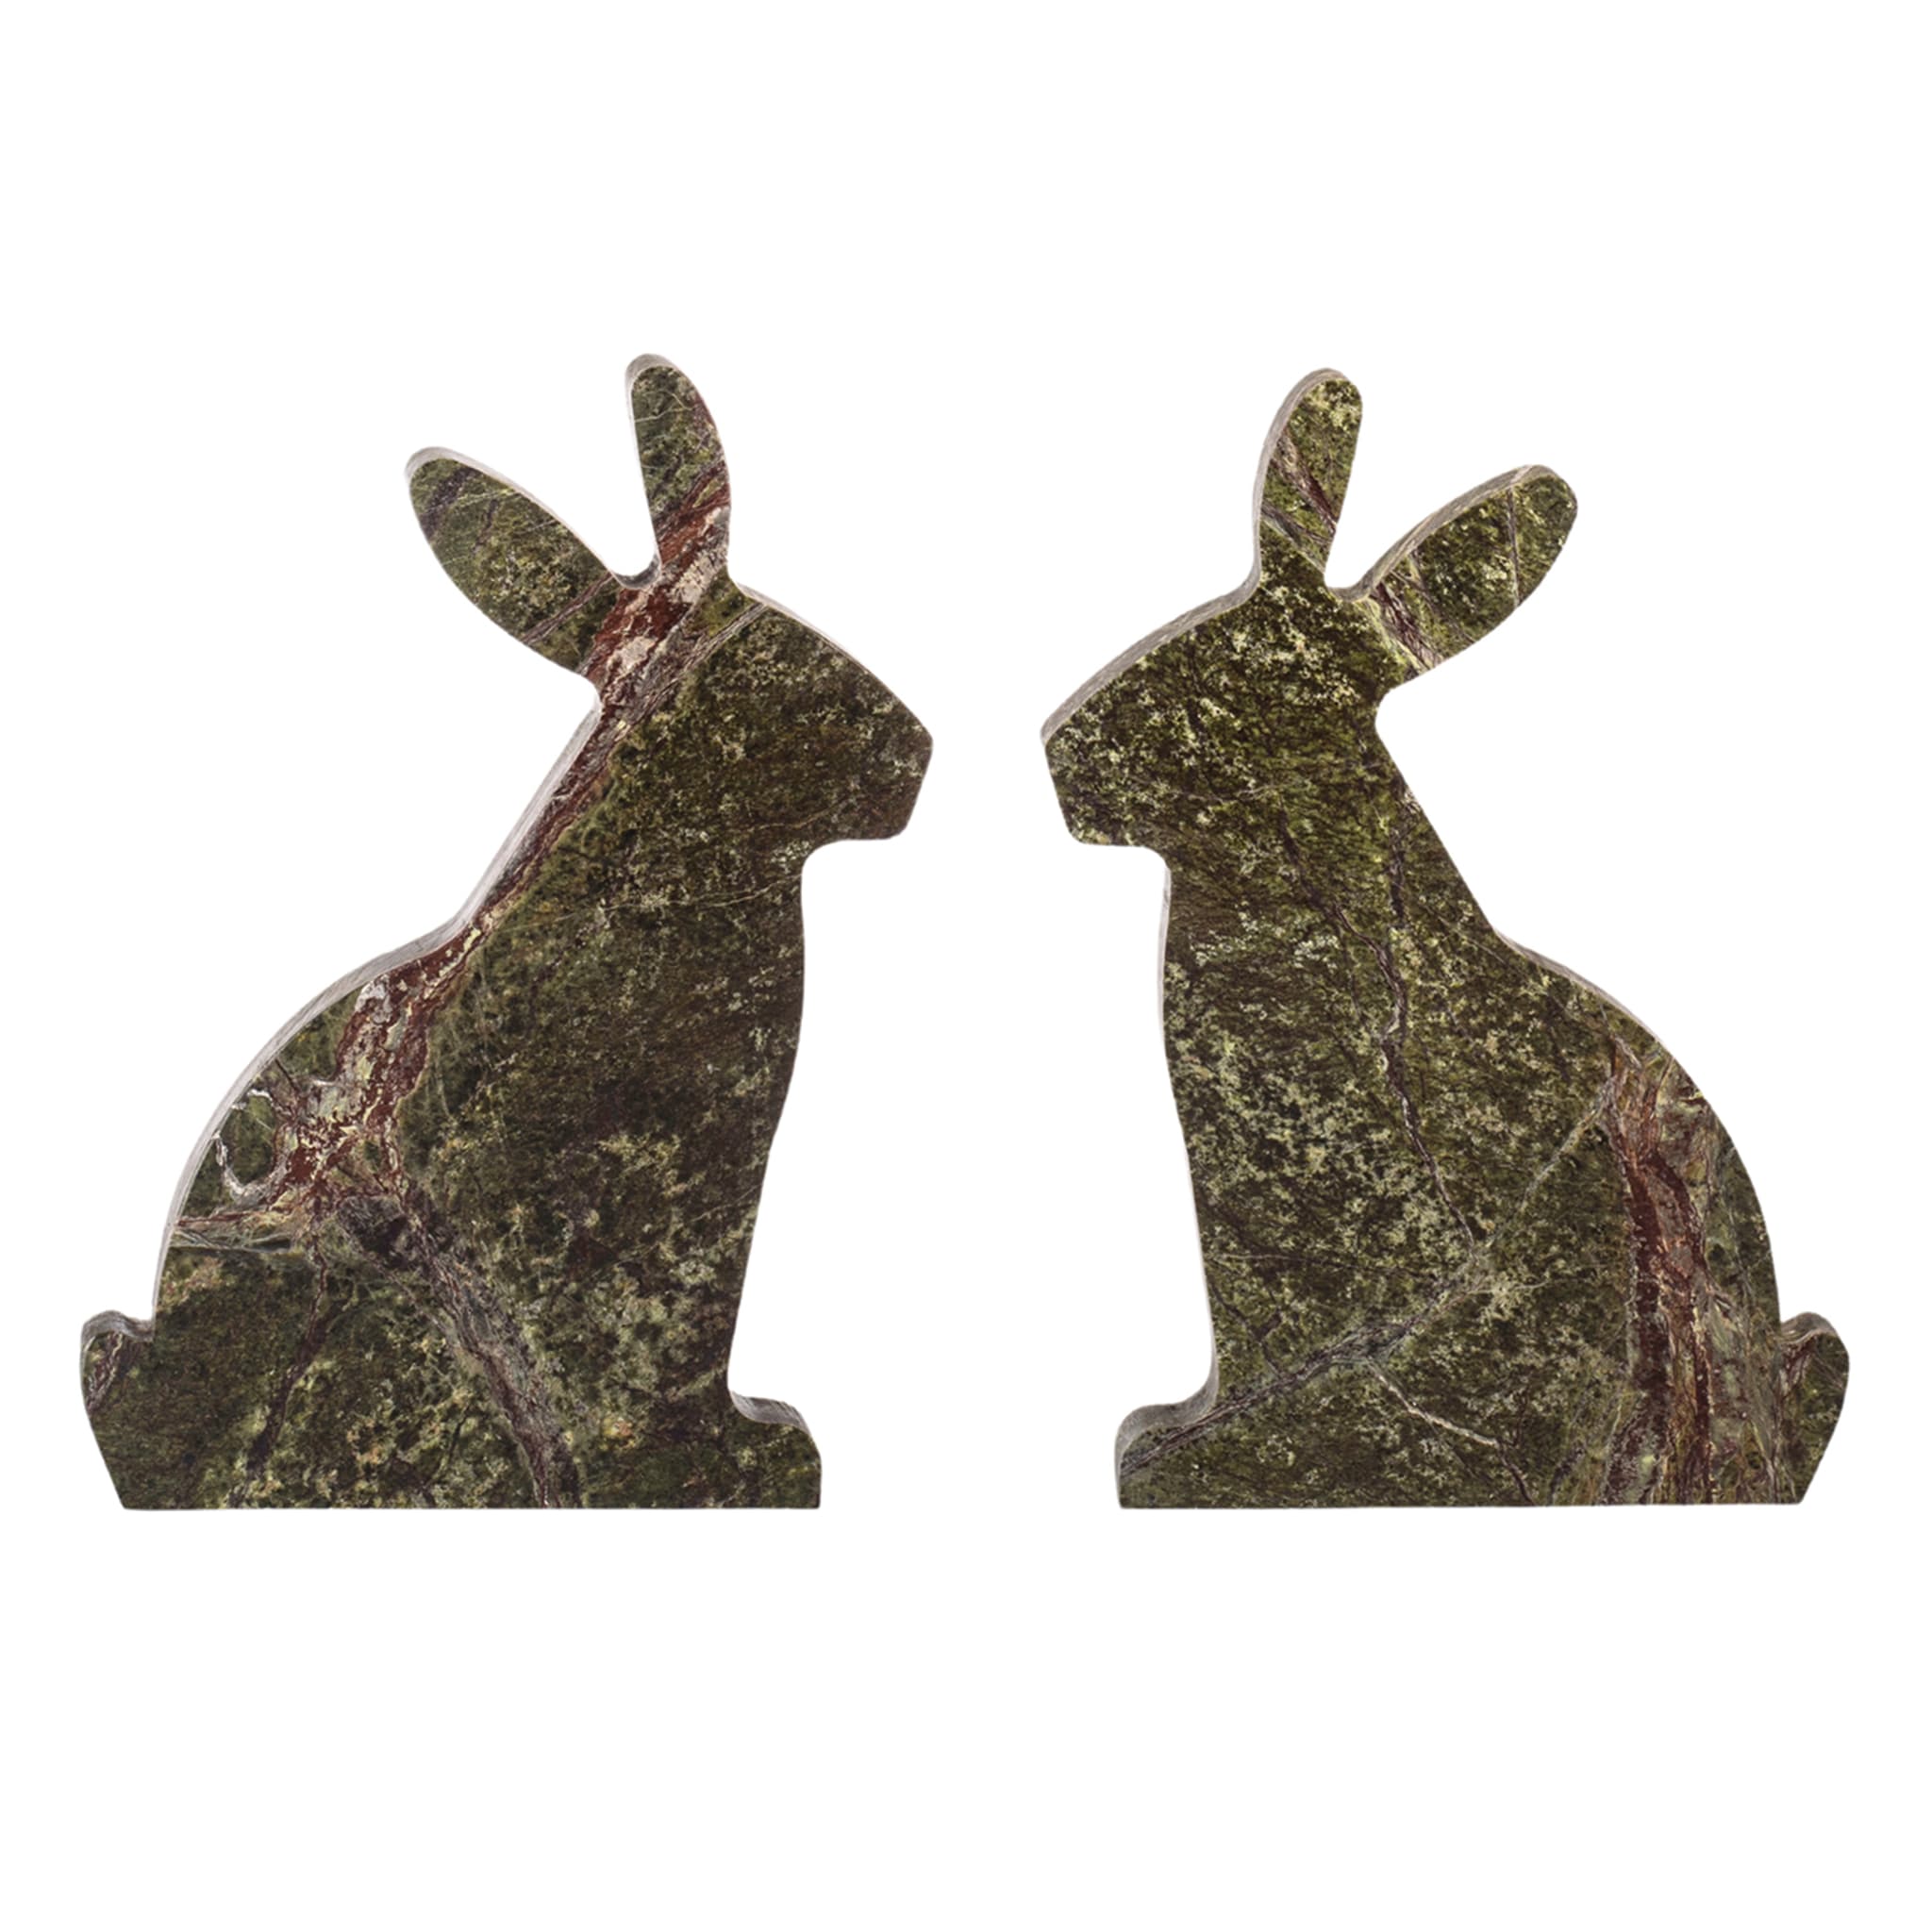 Bunny Set of 2 Picasso Green Bookends by Alessandra Grasso - Alternative view 3